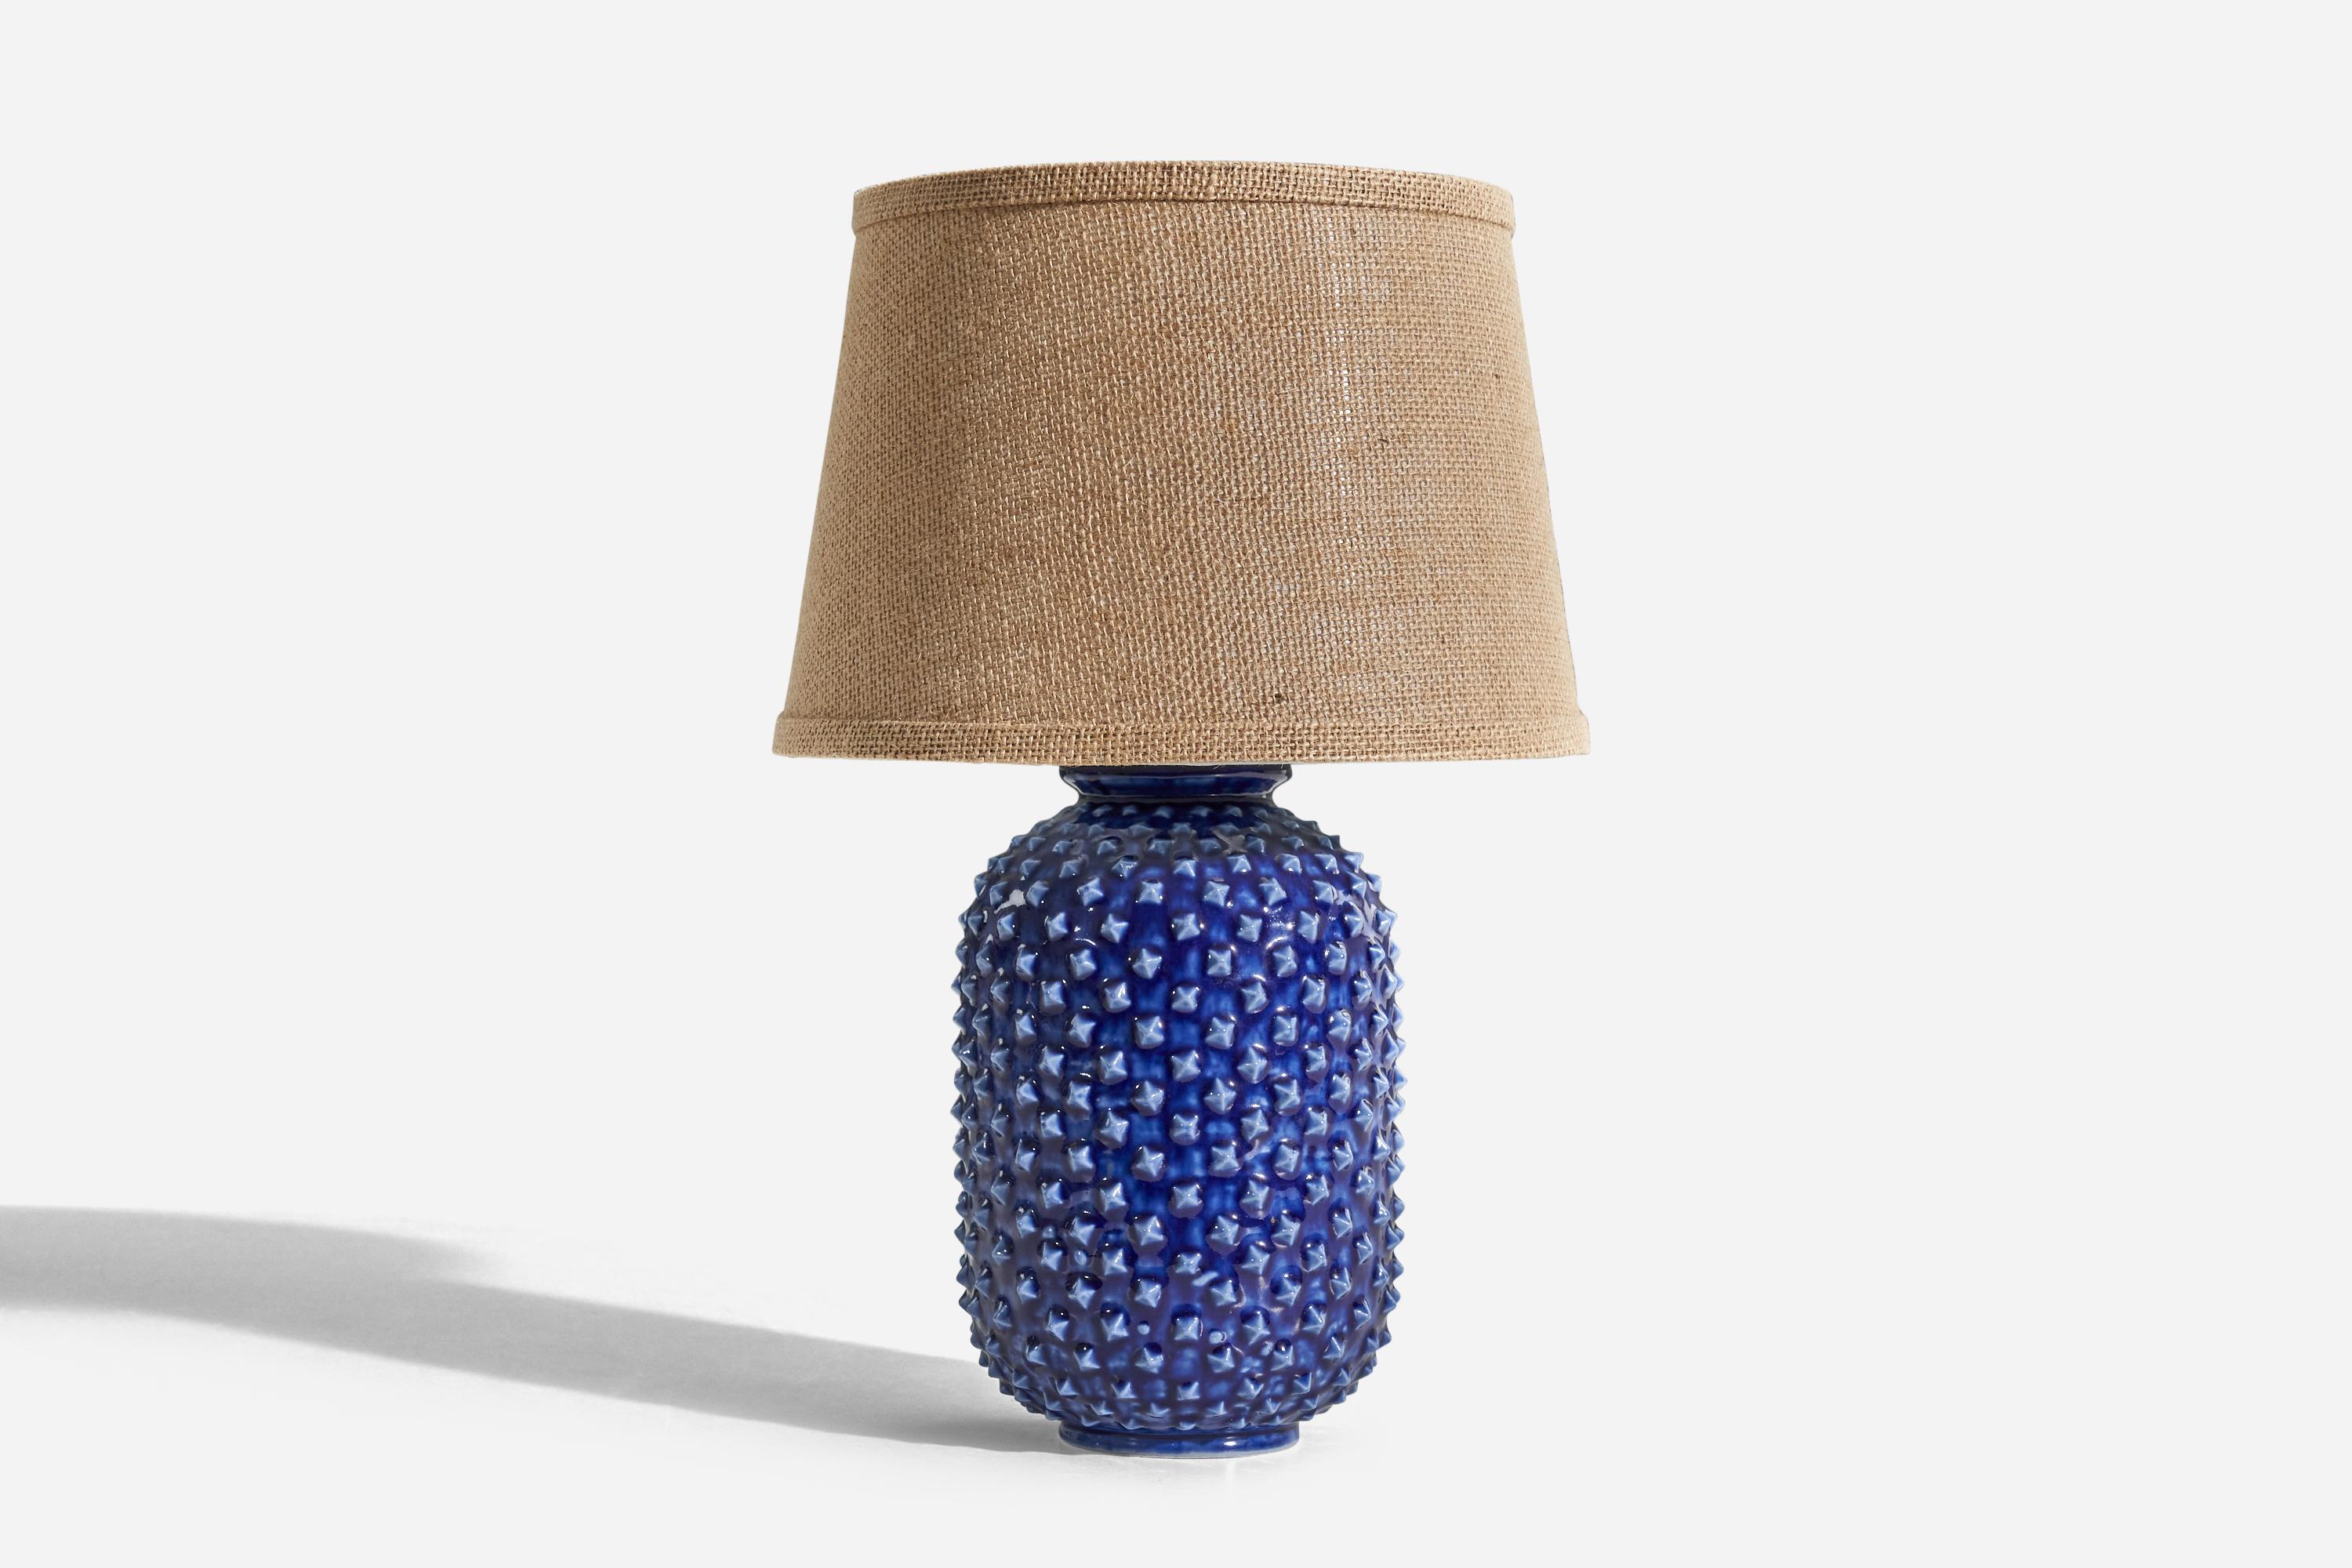 A blue, glazed stoneware table lamp designed by Gunnar Nylund and produced by Rörstrand, Sweden, 1950s. 

Sold without lampshade. 
Dimensions of Lamp (inches) : 12 x 5.93 x 5.93 (H x W x D)
Dimensions of Shade (inches) : 8 x 10.25 x 7 (T x B x